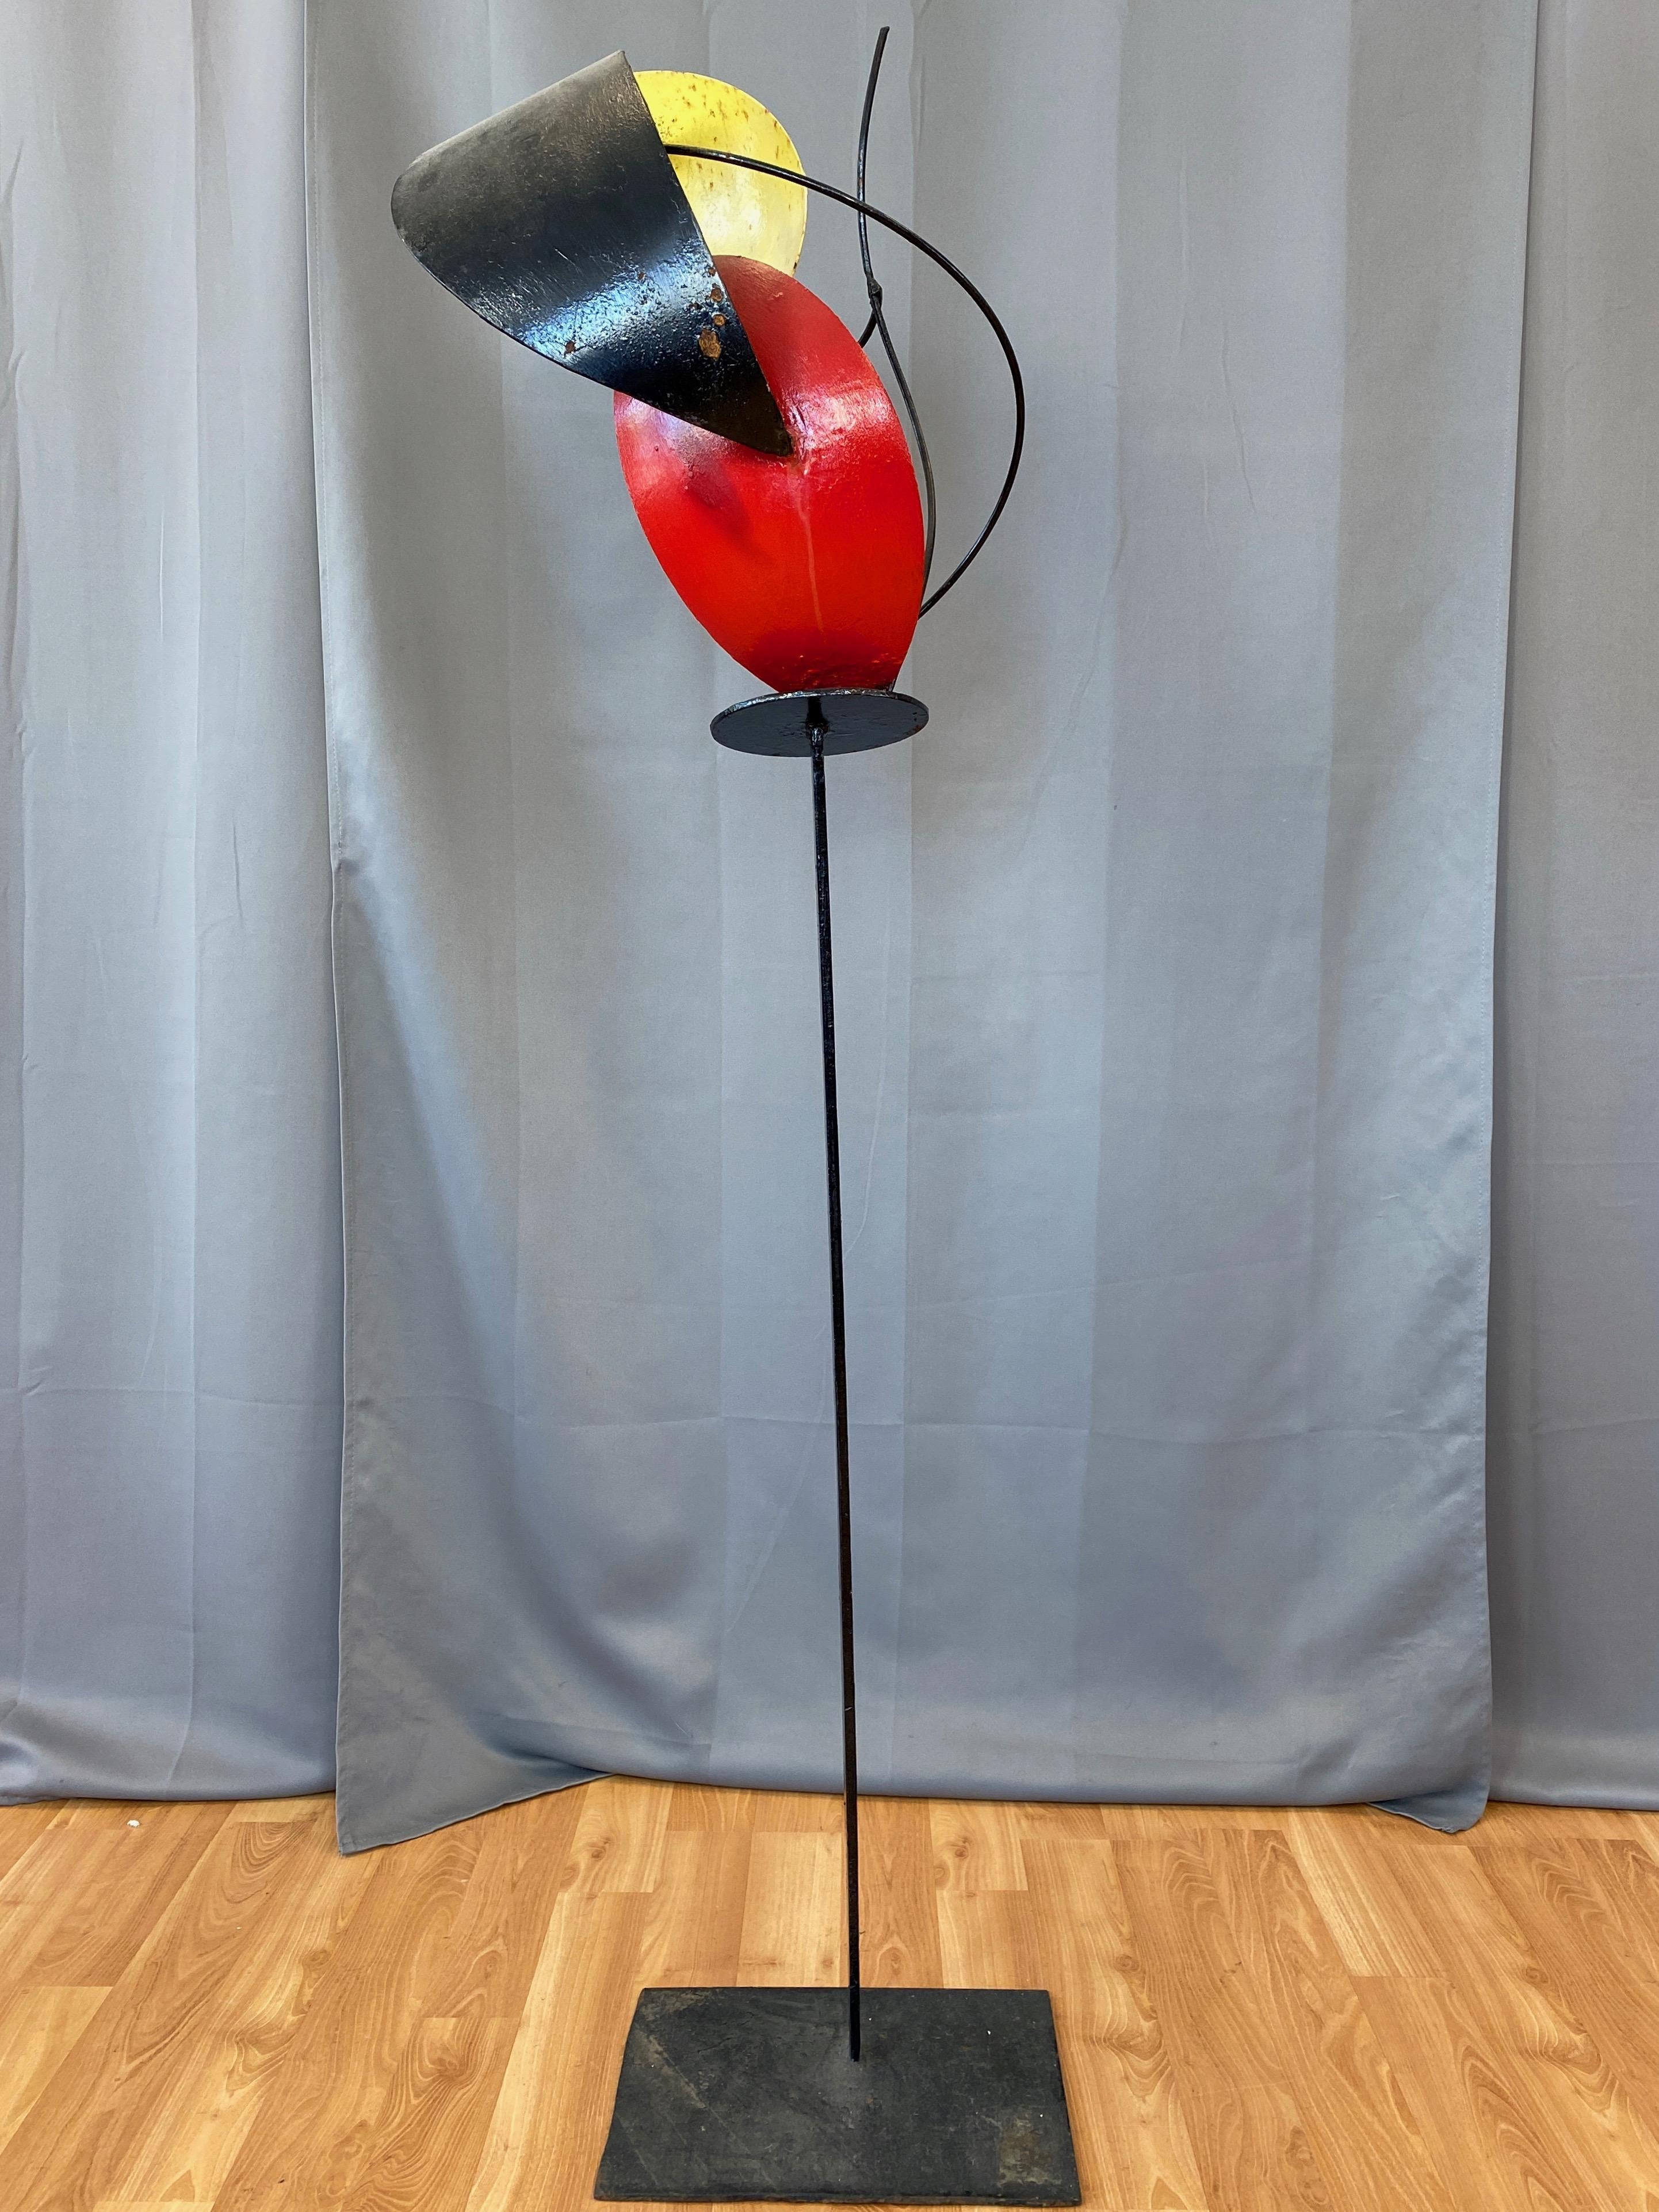 A tall abstract expressionist enameled steel sculpture by San Francisco painter and sculptor Béla Harcos from his late 1990s “Calligraphy in Steel” exhibition.

Trio of billowed sail or leaf-like forms in black, red, and yellow enameled welded